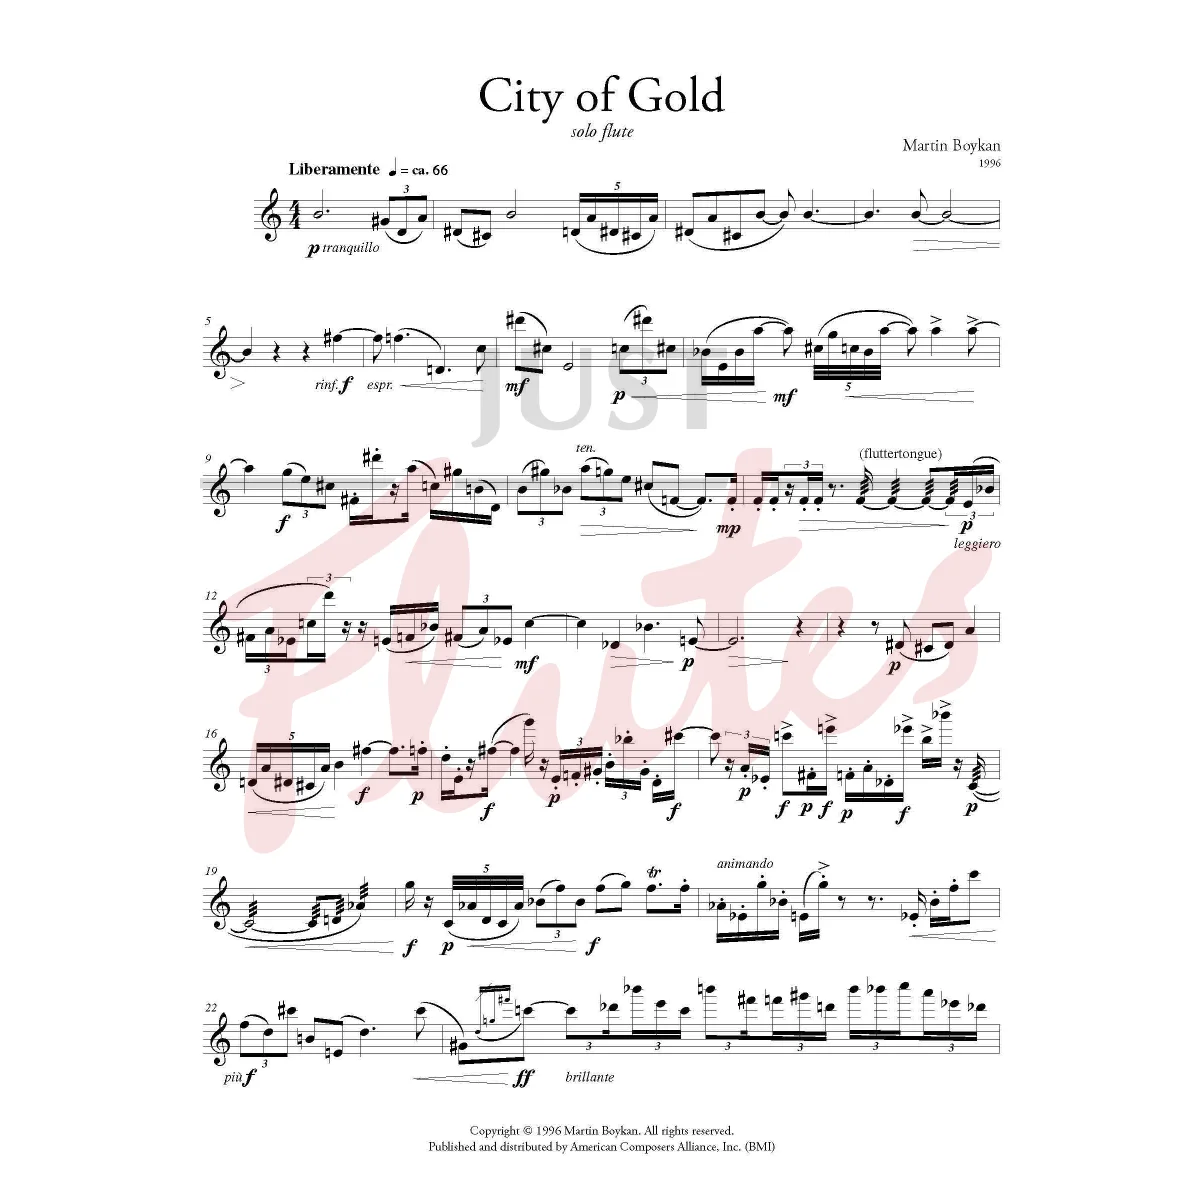 City of Gold for Solo Flute